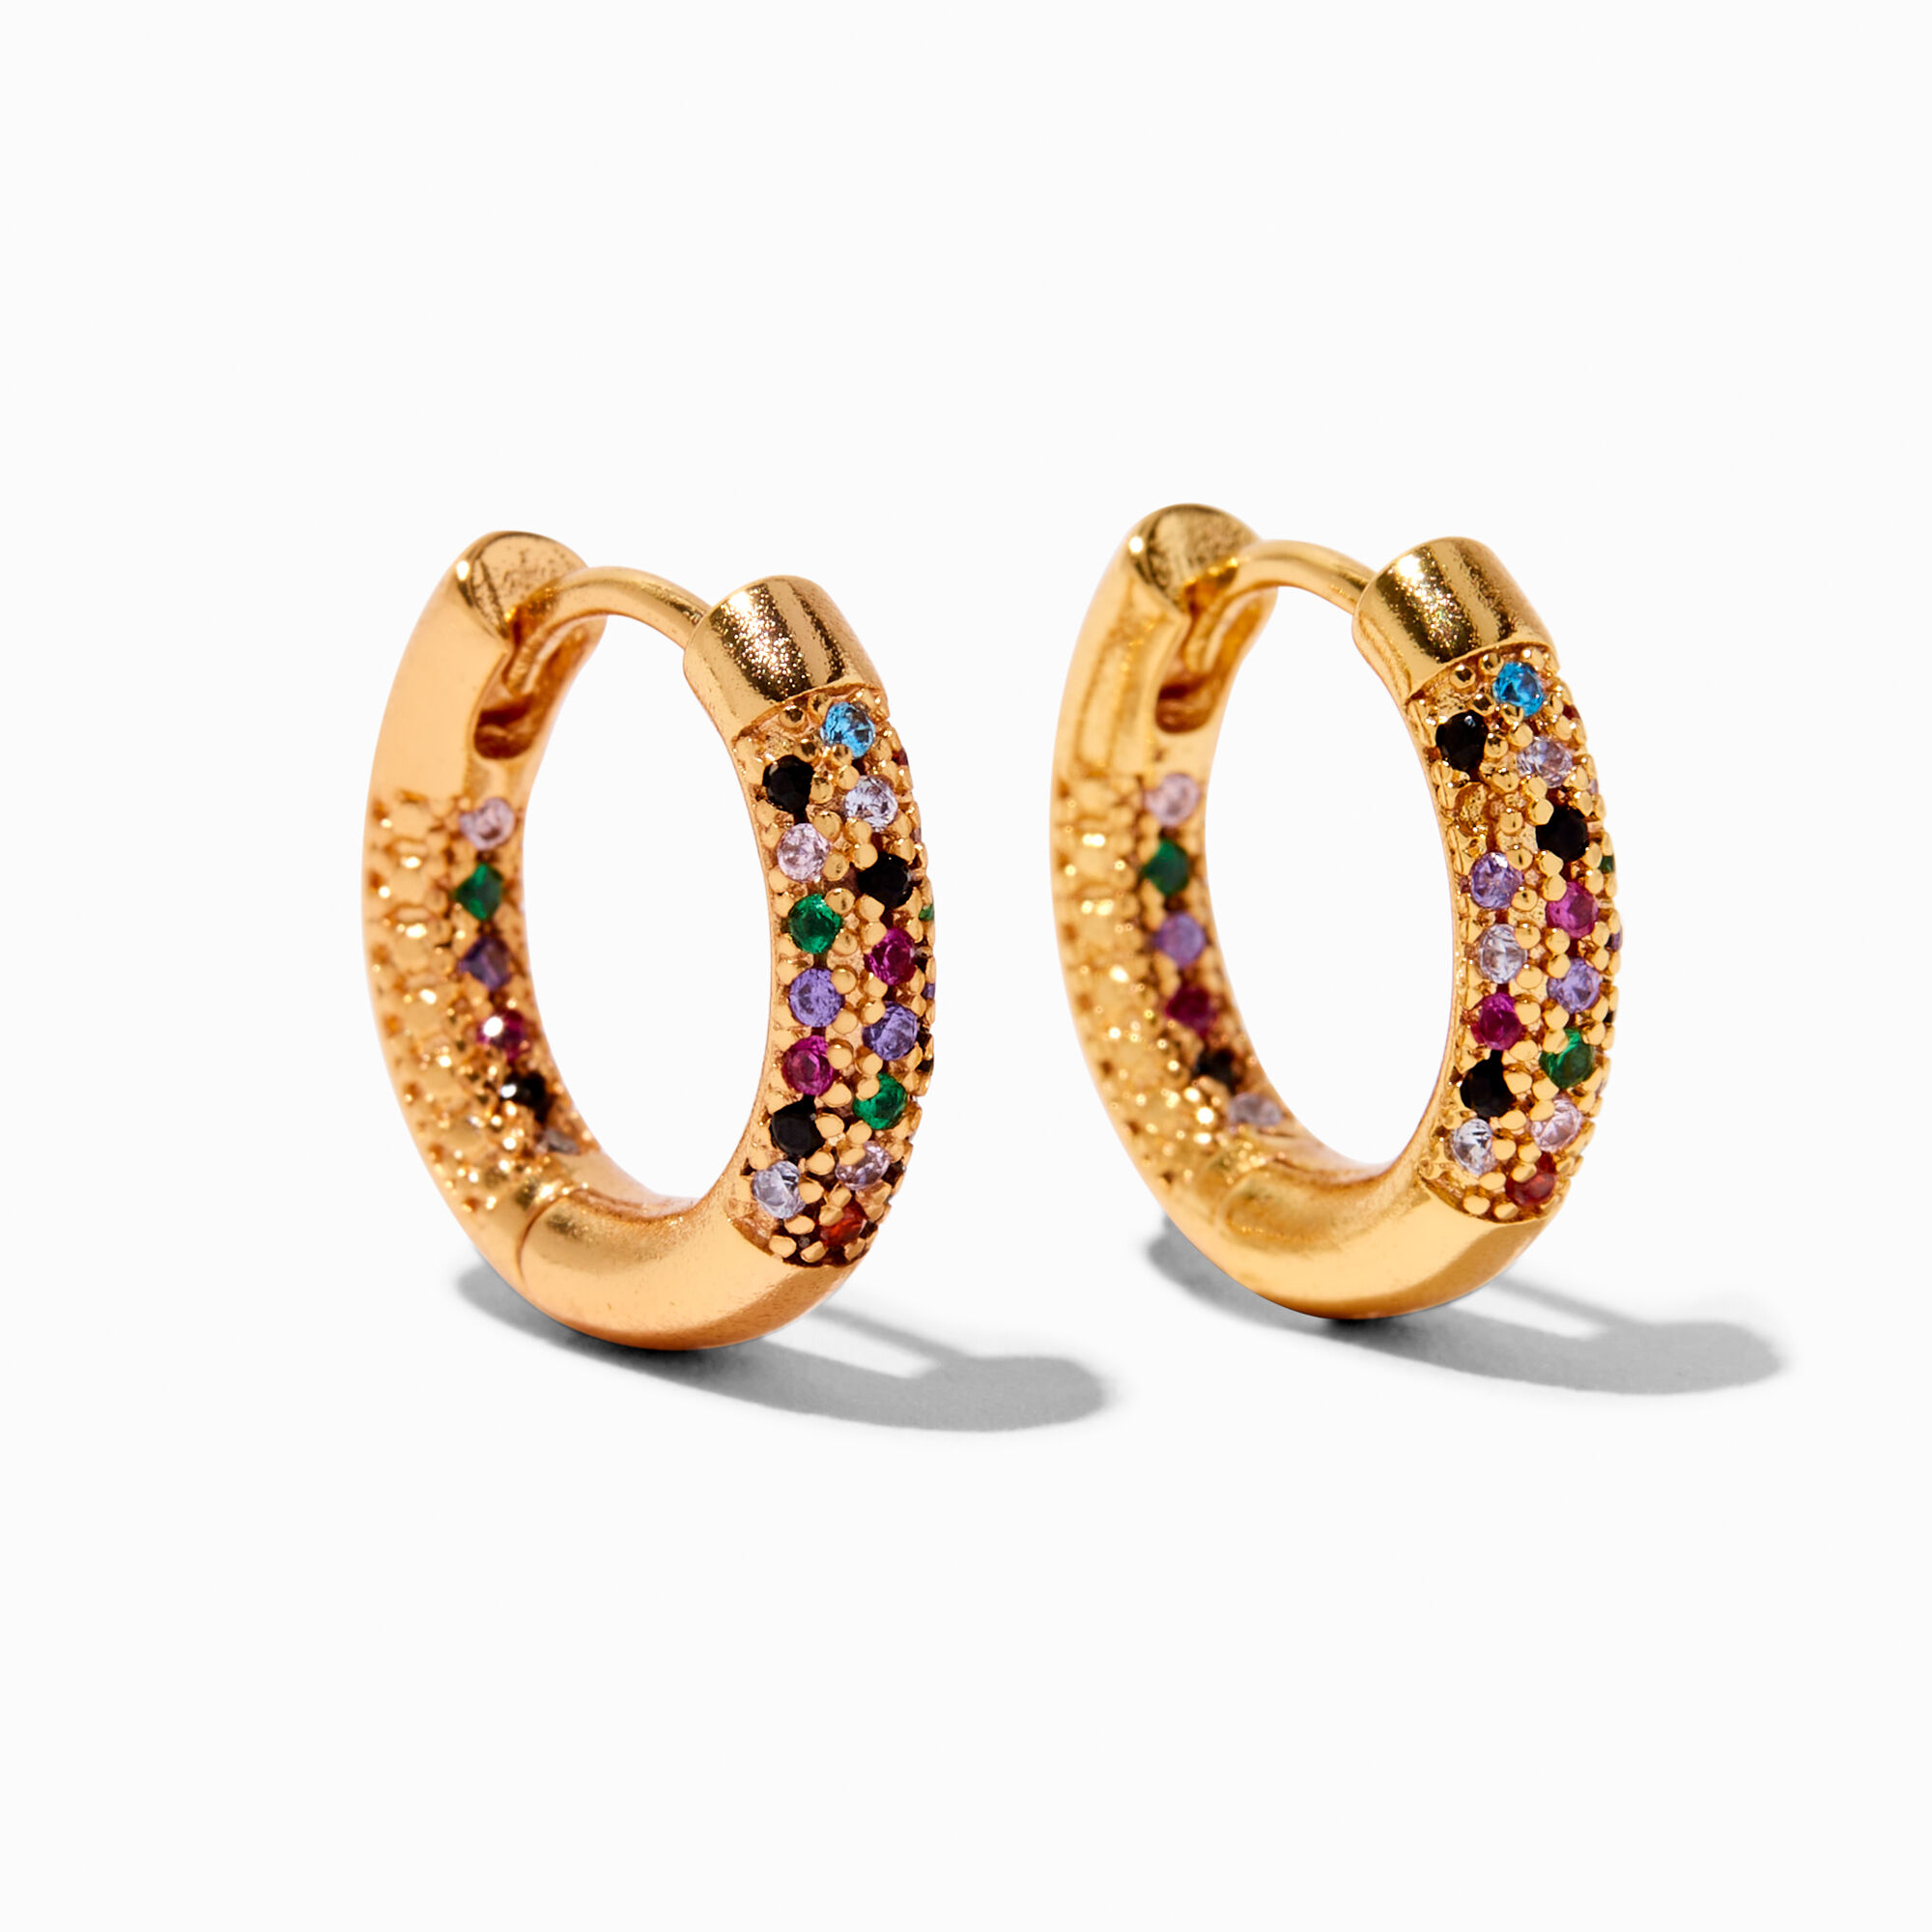 View C Luxe By Claires 18K Gold Plated Rainbow Cubic Zirconia 12MM Hoop Earrings Yellow information